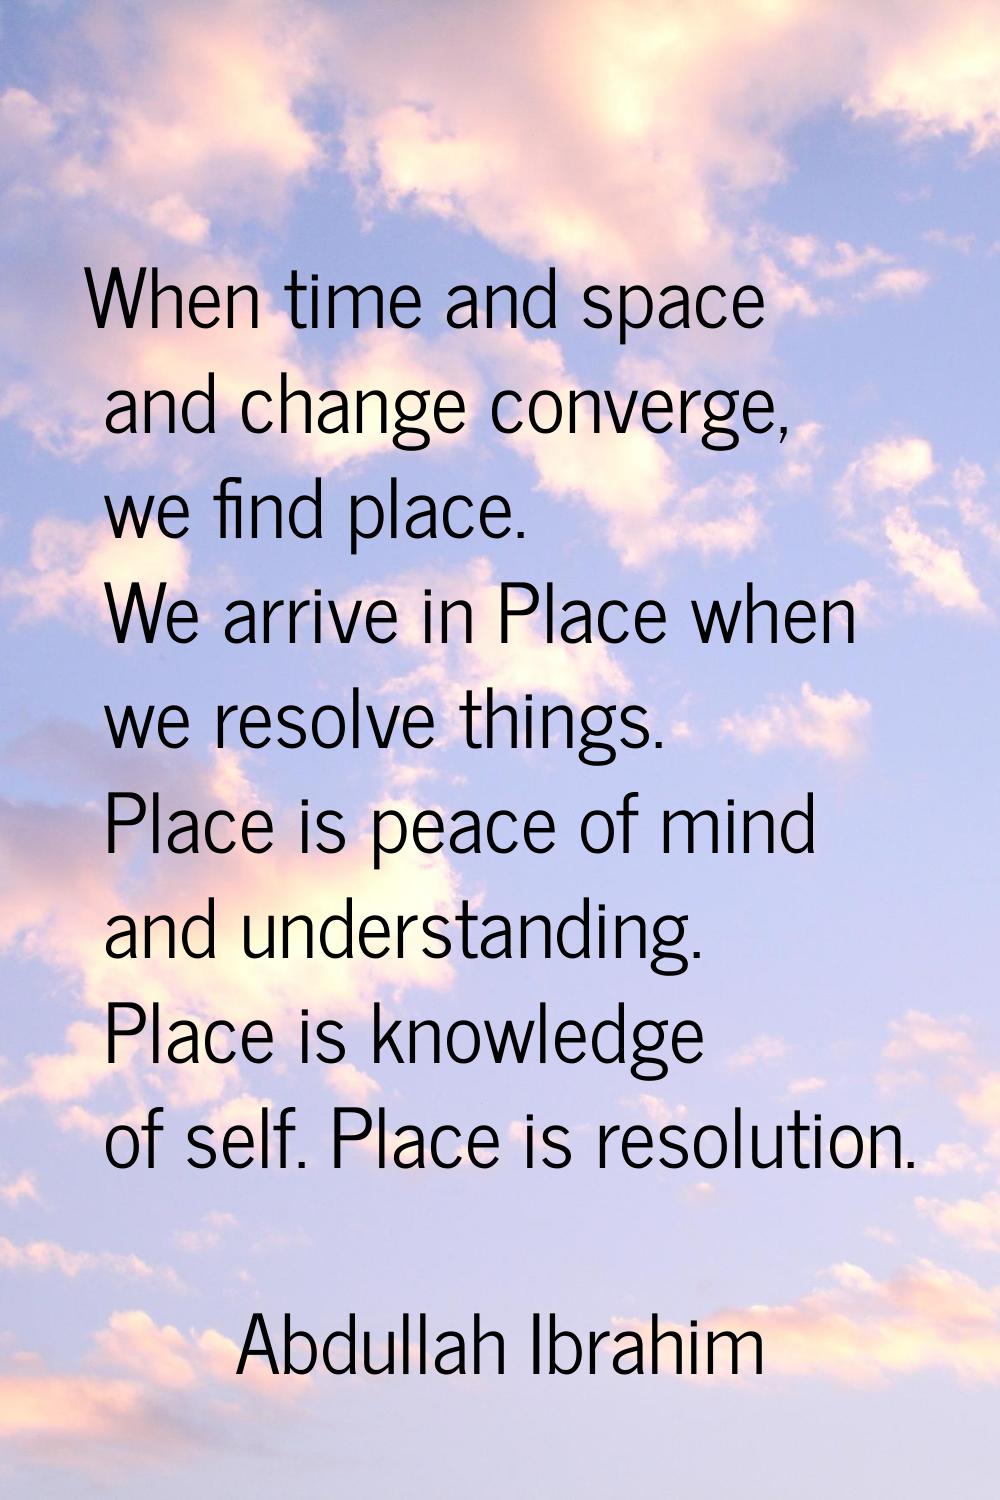 When time and space and change converge, we find place. We arrive in Place when we resolve things. 